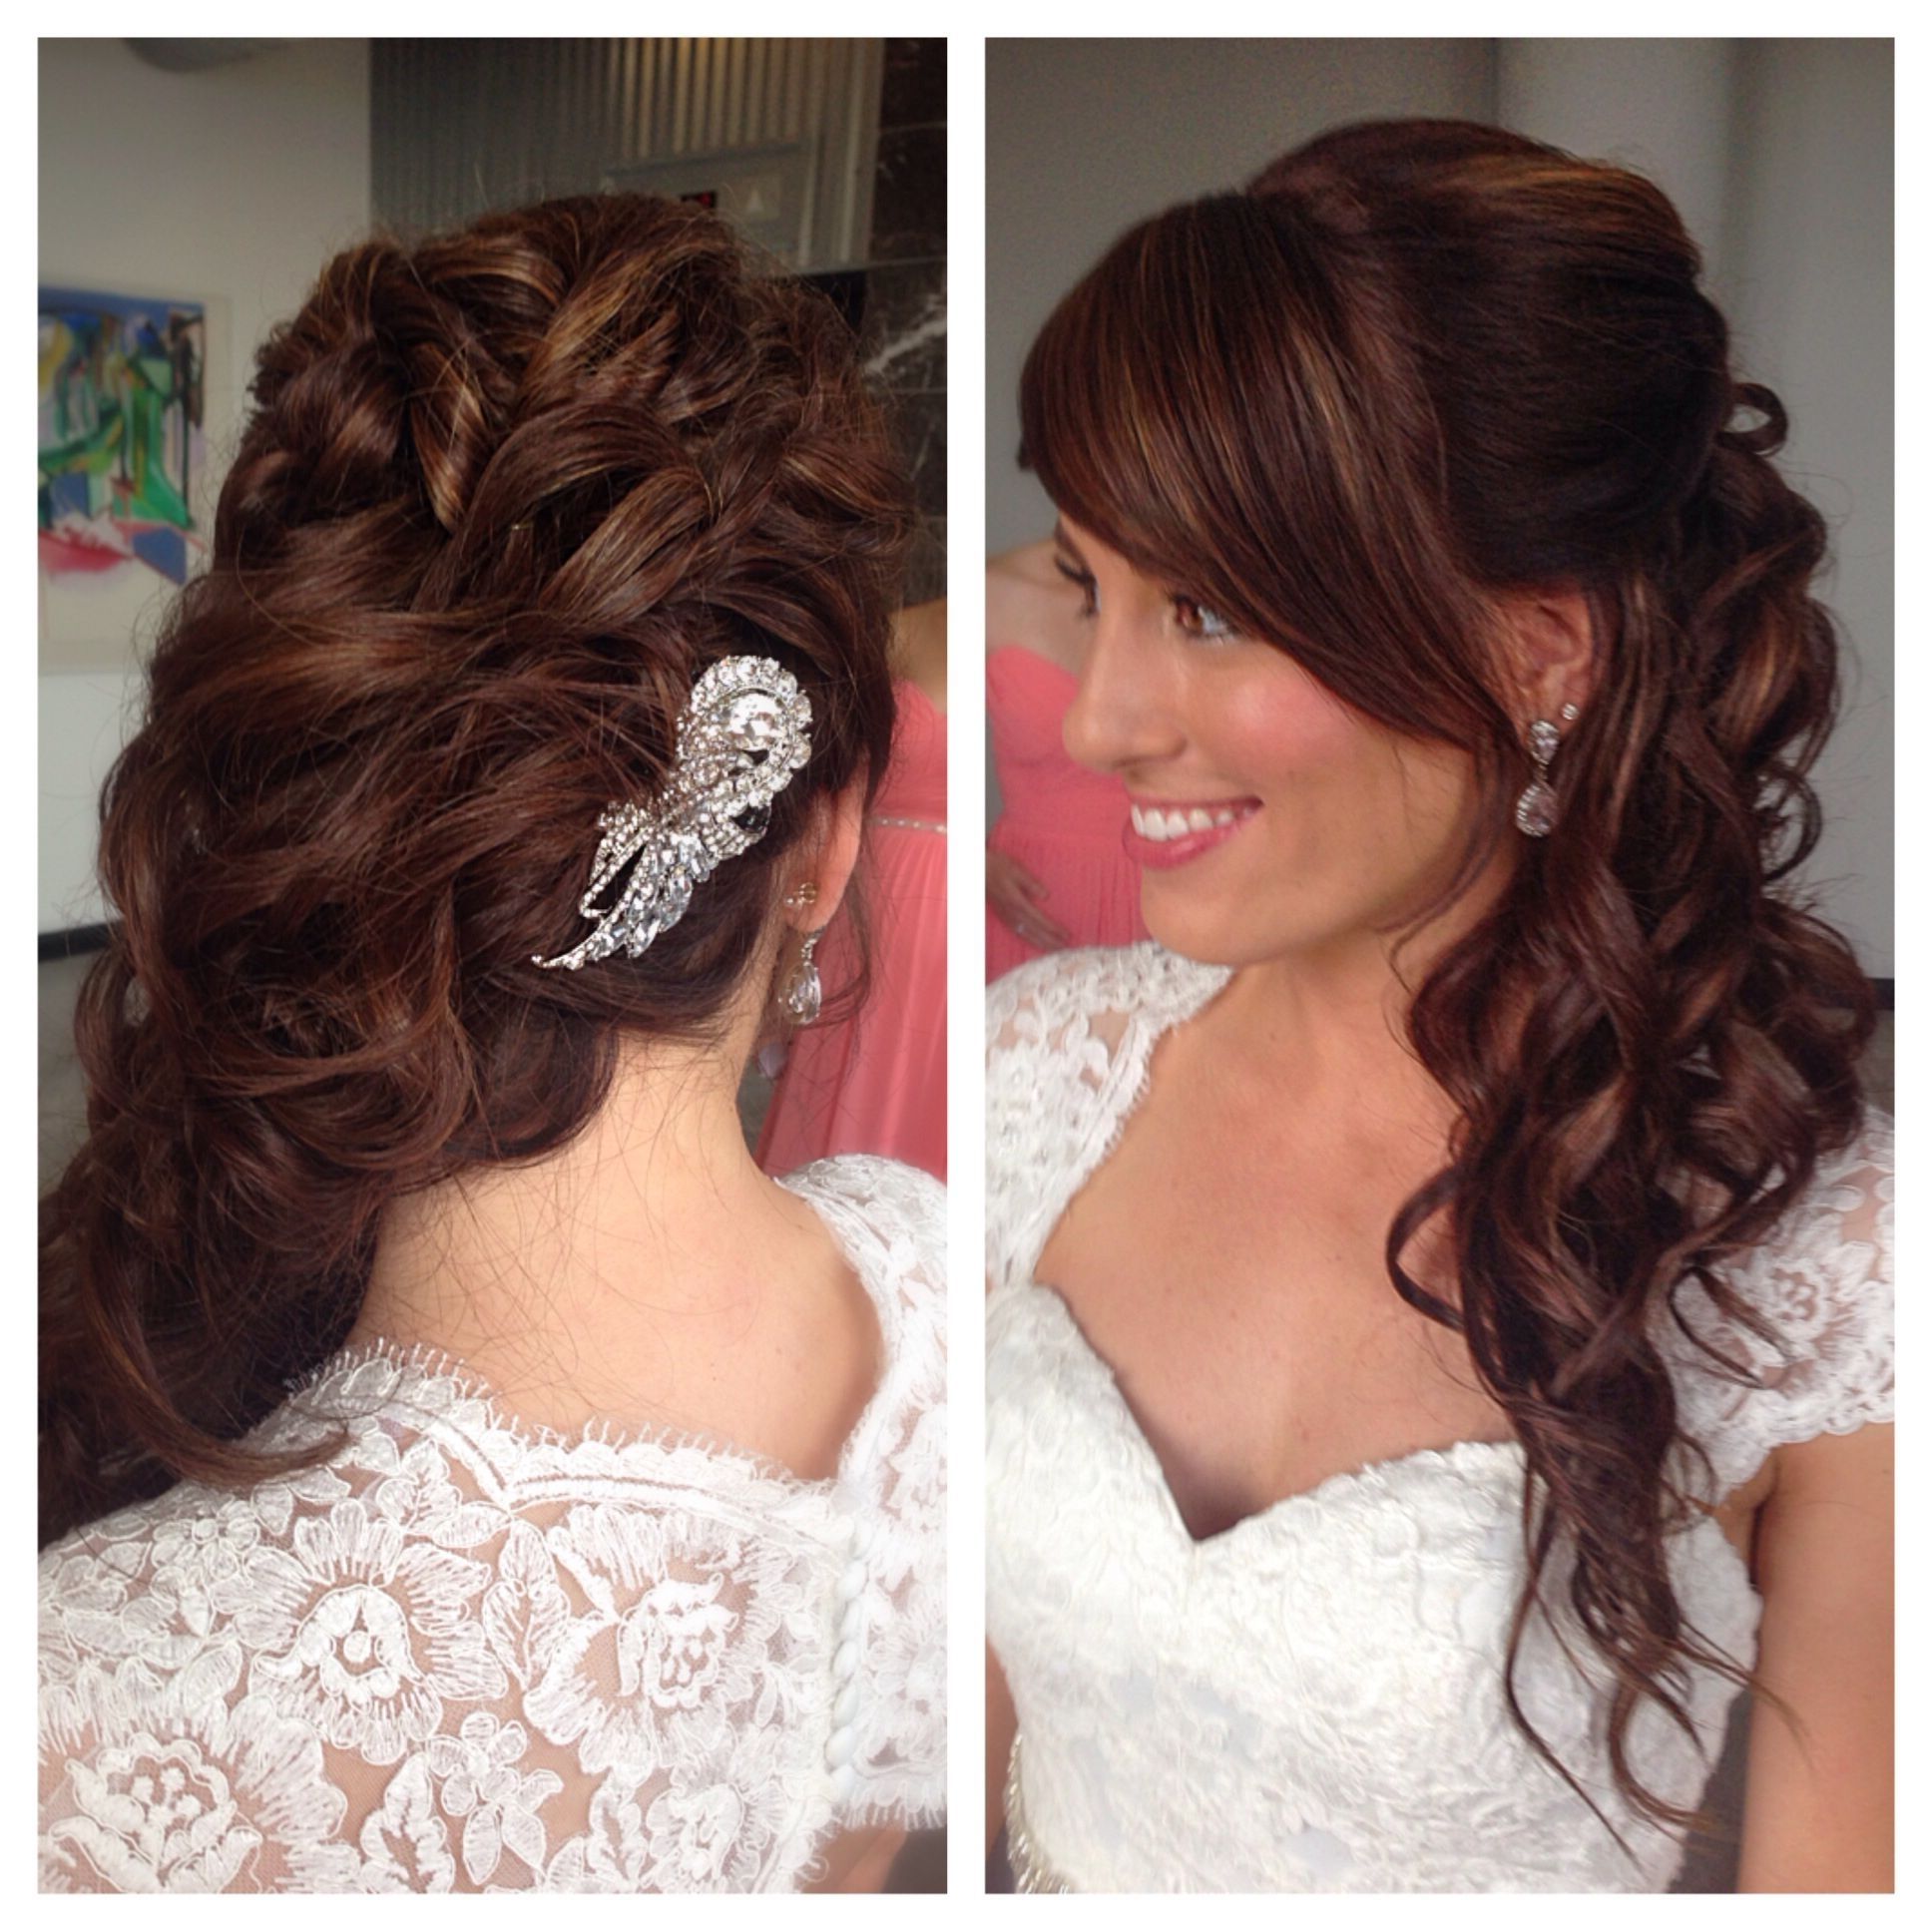 Best And Newest Wedding Hairstyles For Long Hair Pulled To The Side With Beautiful Wedding Hair, Wavy Curls, Pulled To The Side Up Do (View 11 of 15)